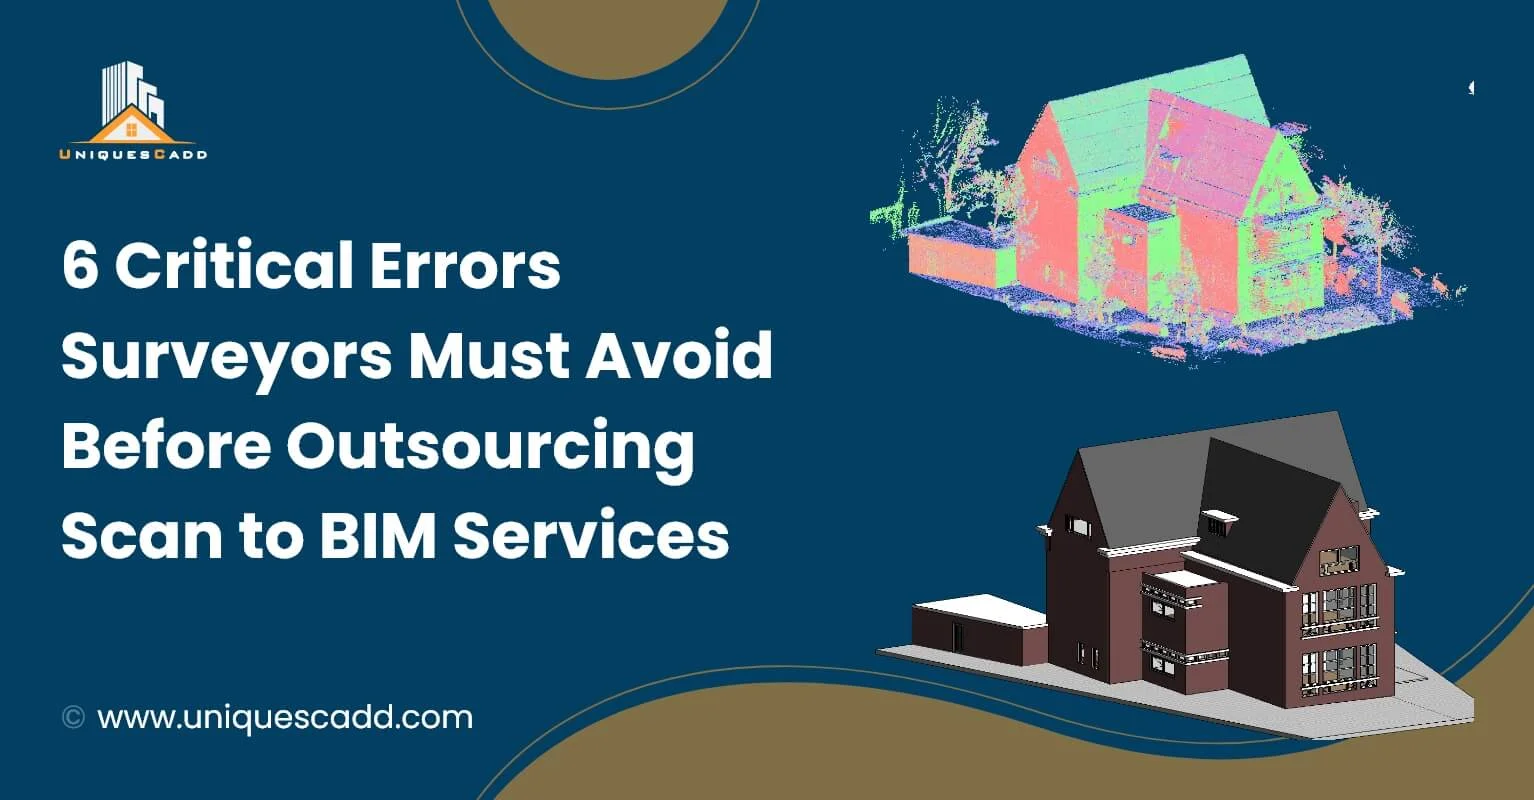 Six Critical Errors Surveyors Must Avoid Before Outsourcing Scan to BIM Services